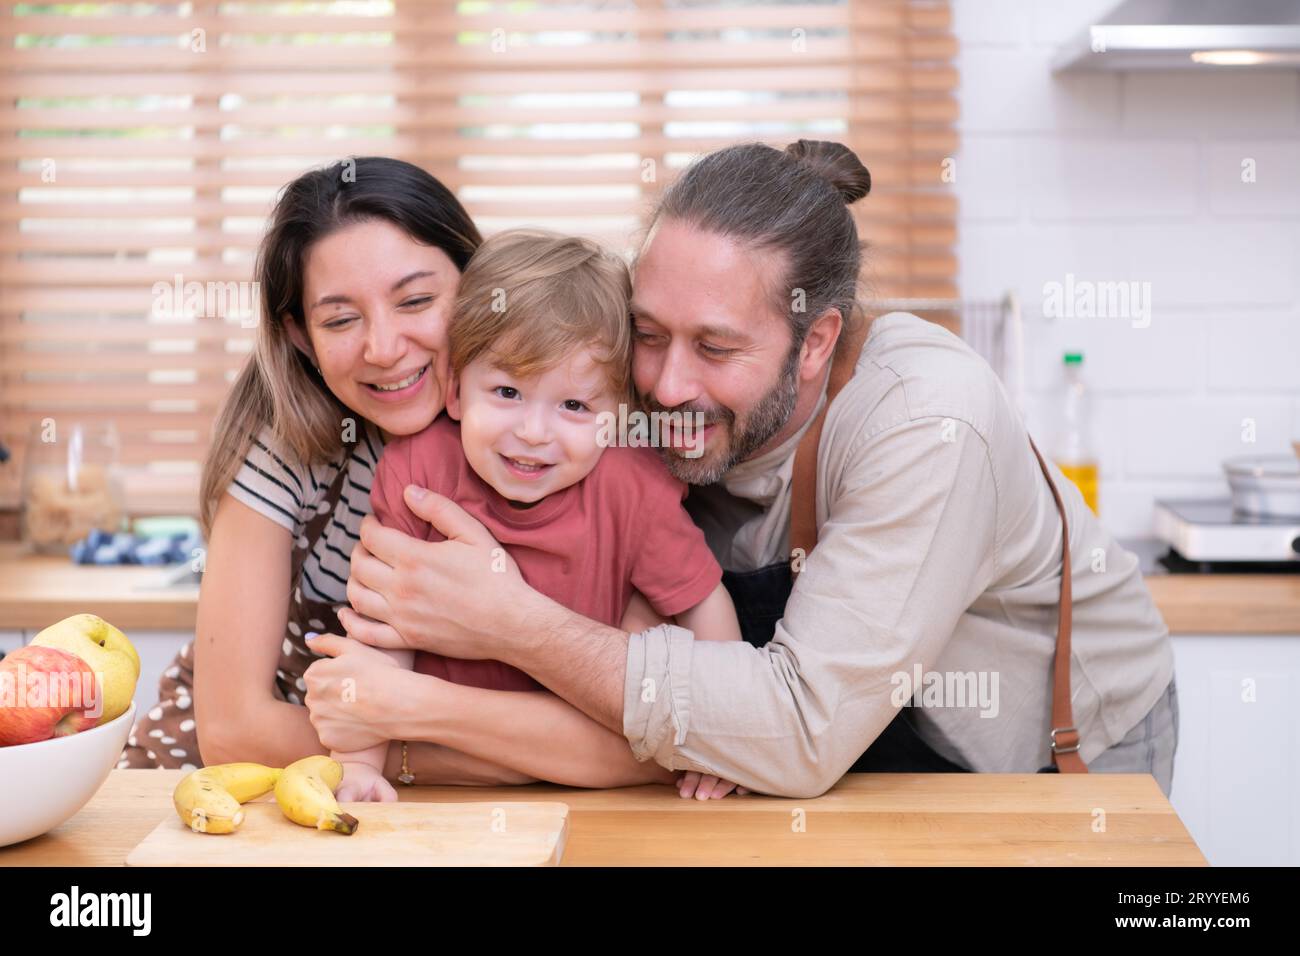 Mom and dad in the kitchen of the house with their small children. Have a good time making dinner together. Stock Photo